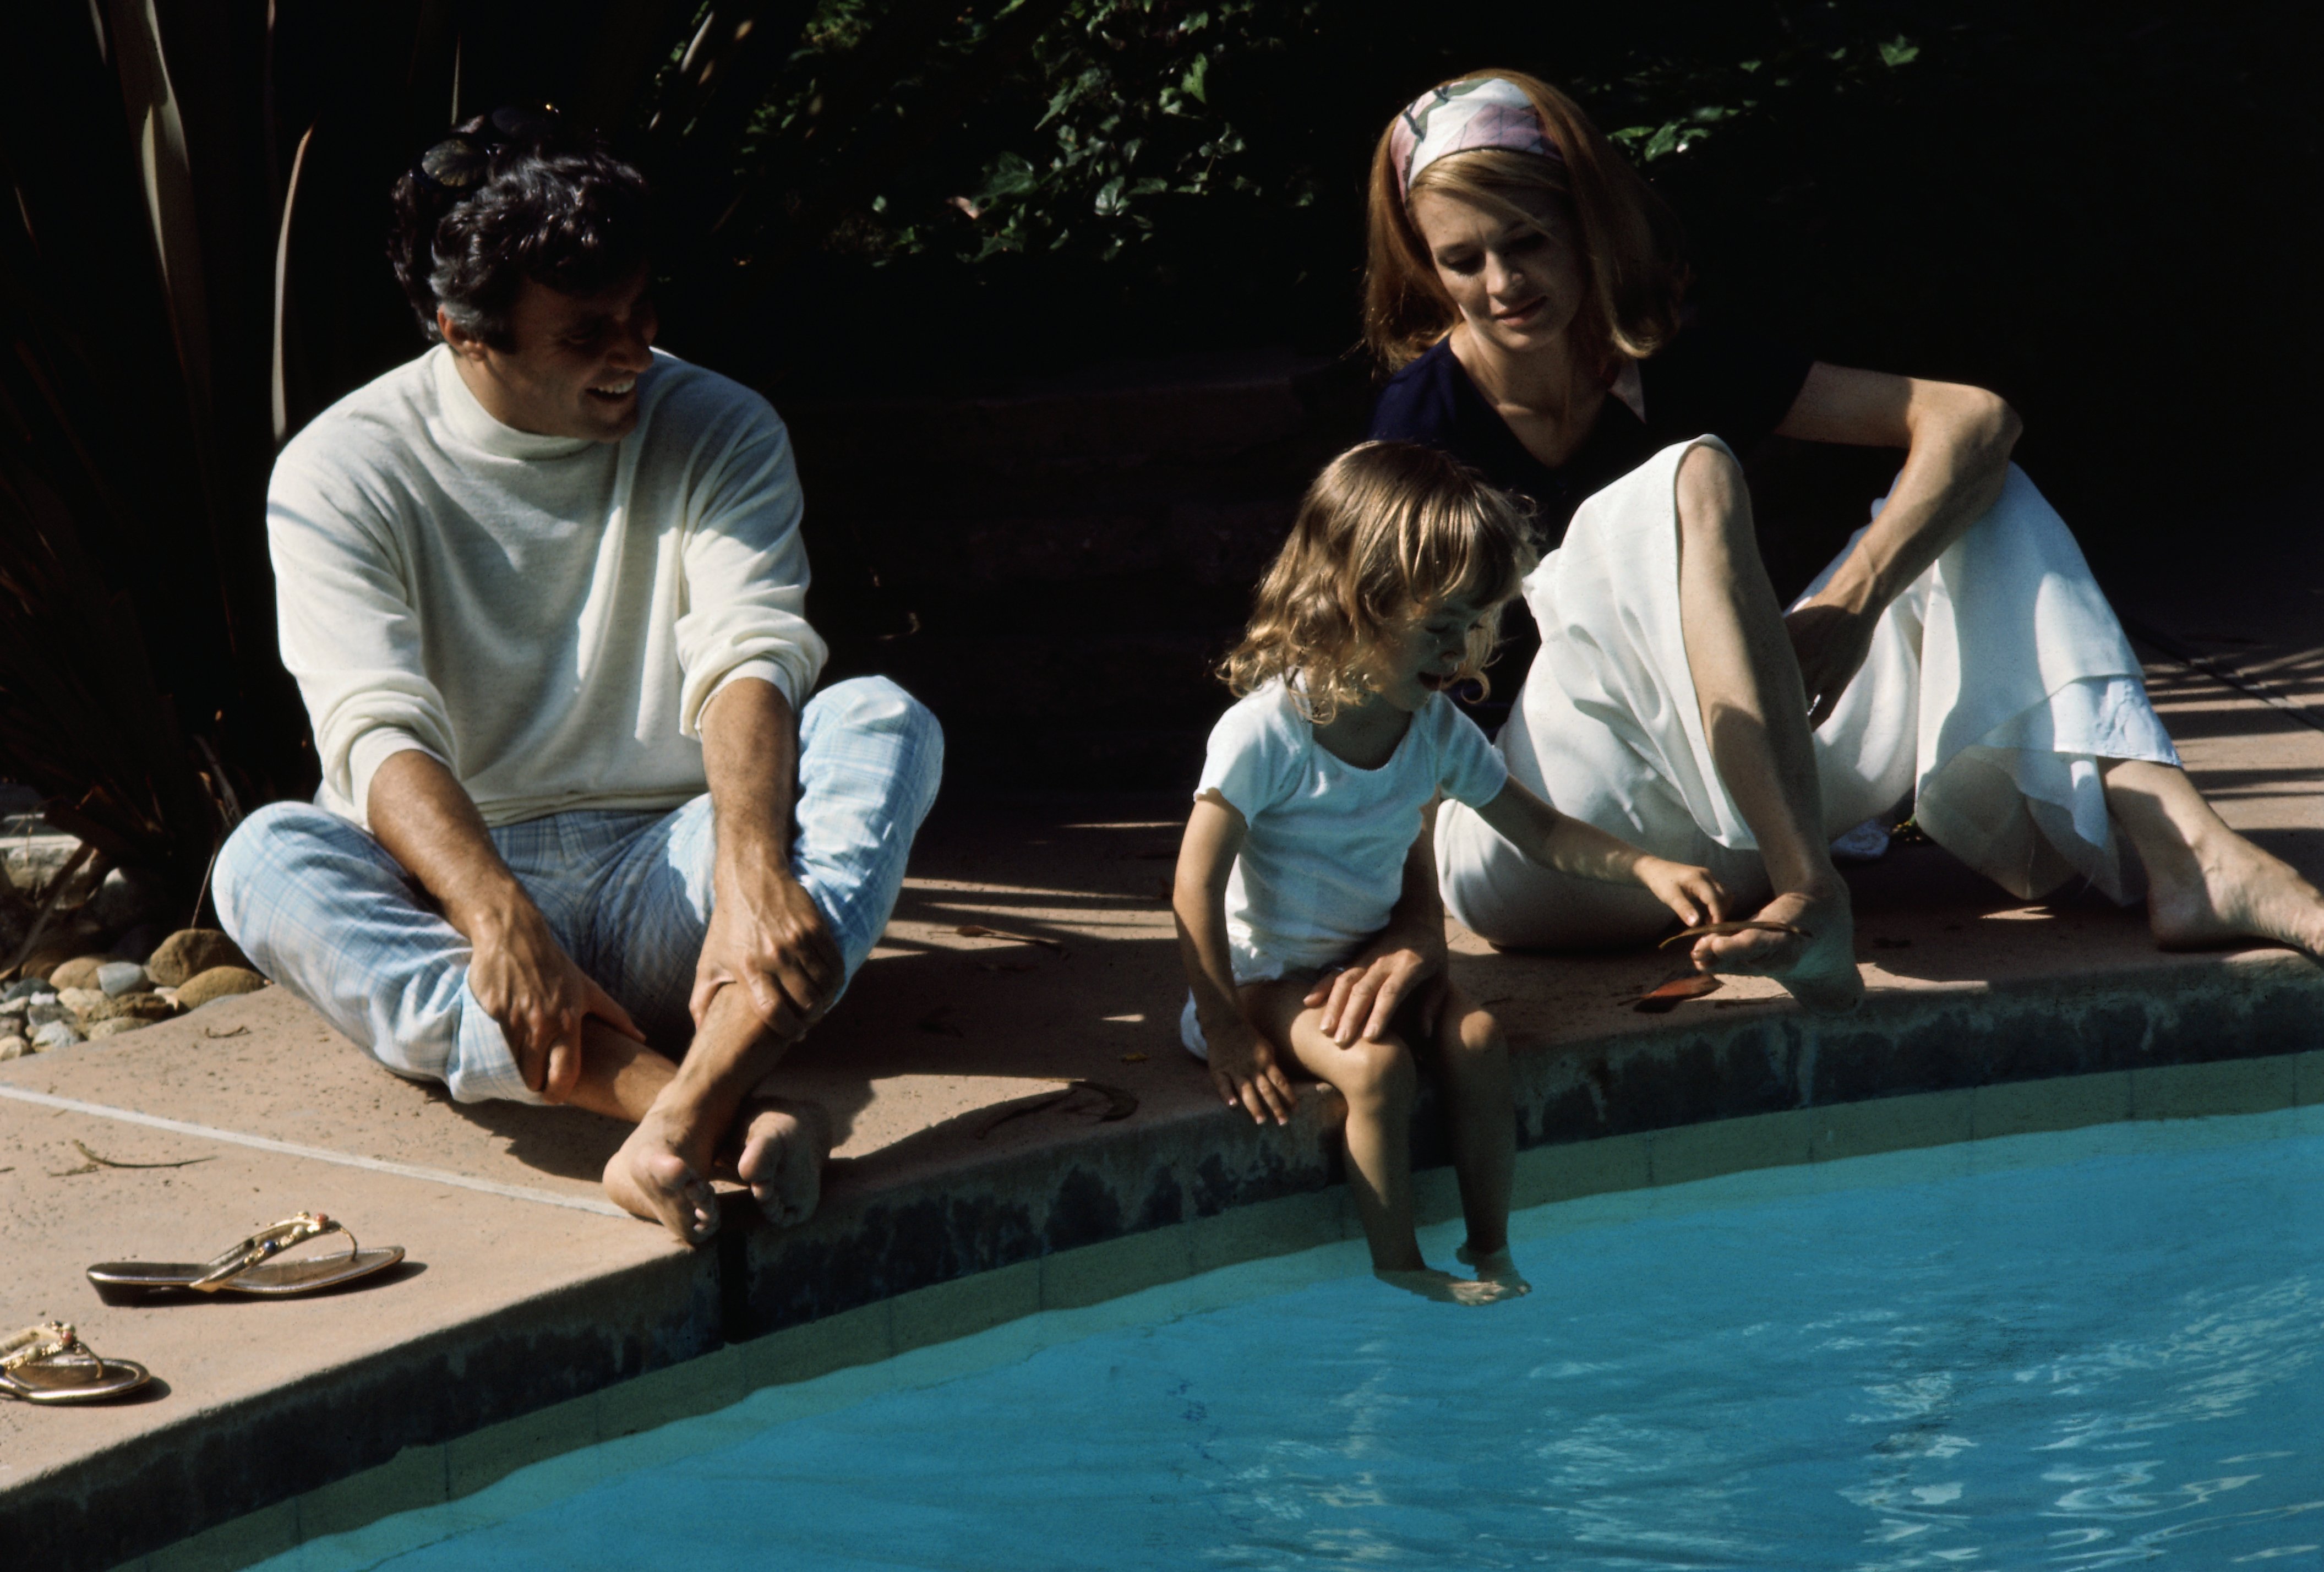 Burt Bacharach, Angie Dickinson, and Lea Nikki in their Hollywood home June 3, 1969 | Source: Getty Images